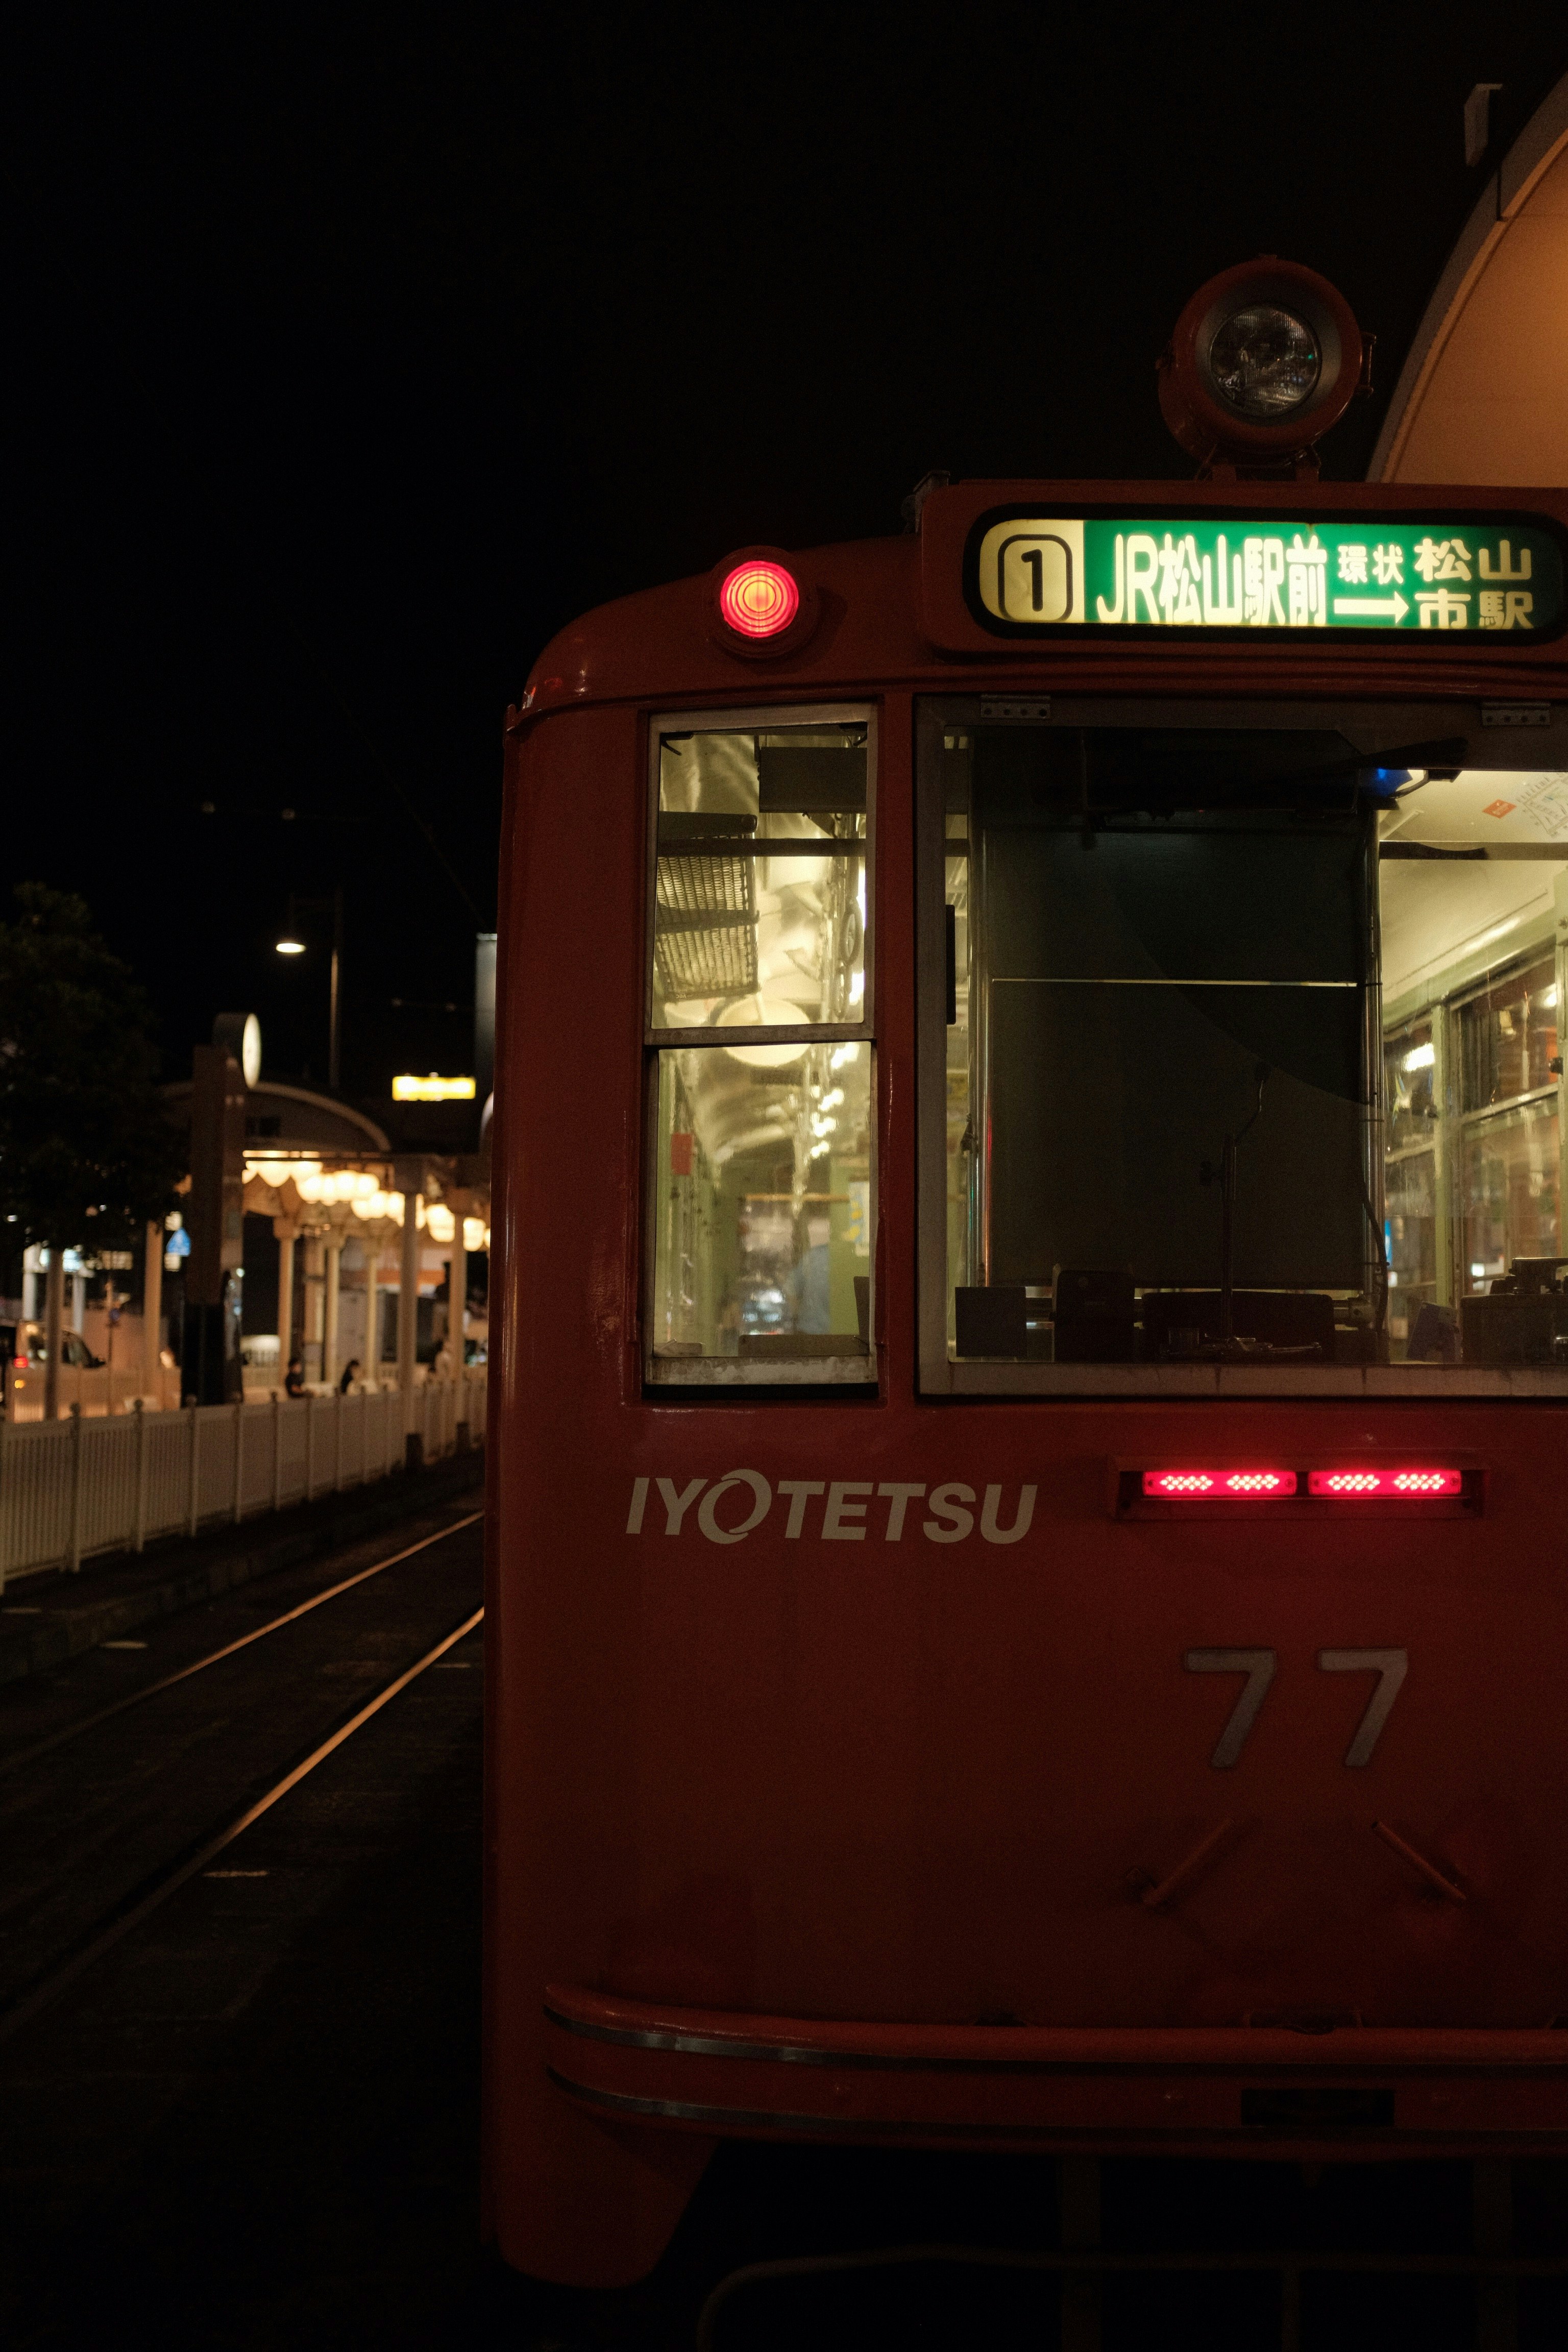 red and white train on the street during night time